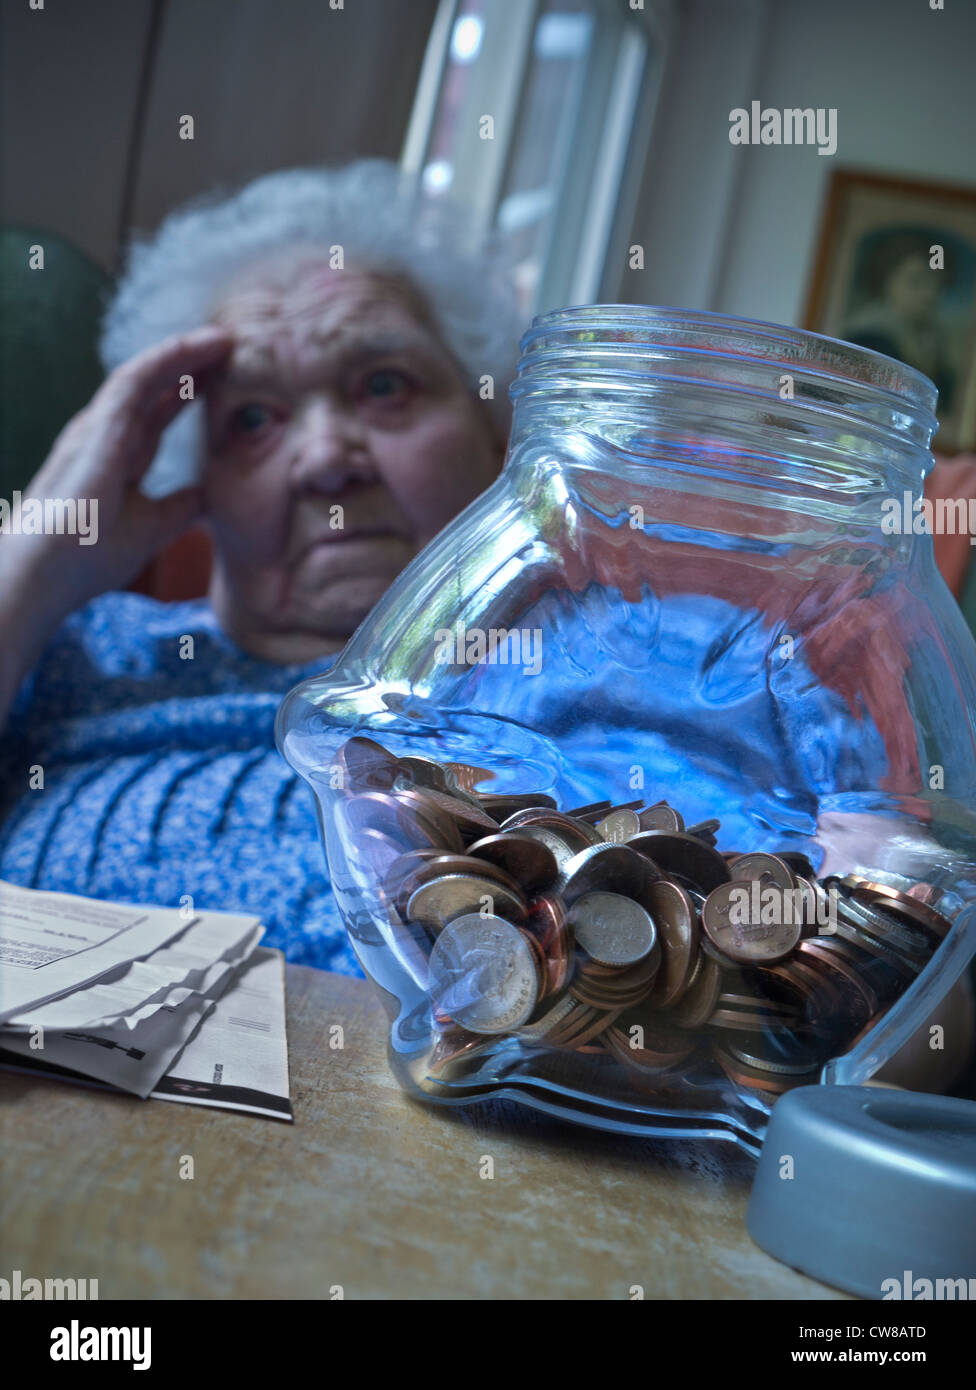 Money troubles senior elderly old age lady apprehensive with financial worries vulnerable, in her living room with savings pot and papers on table Stock Photo